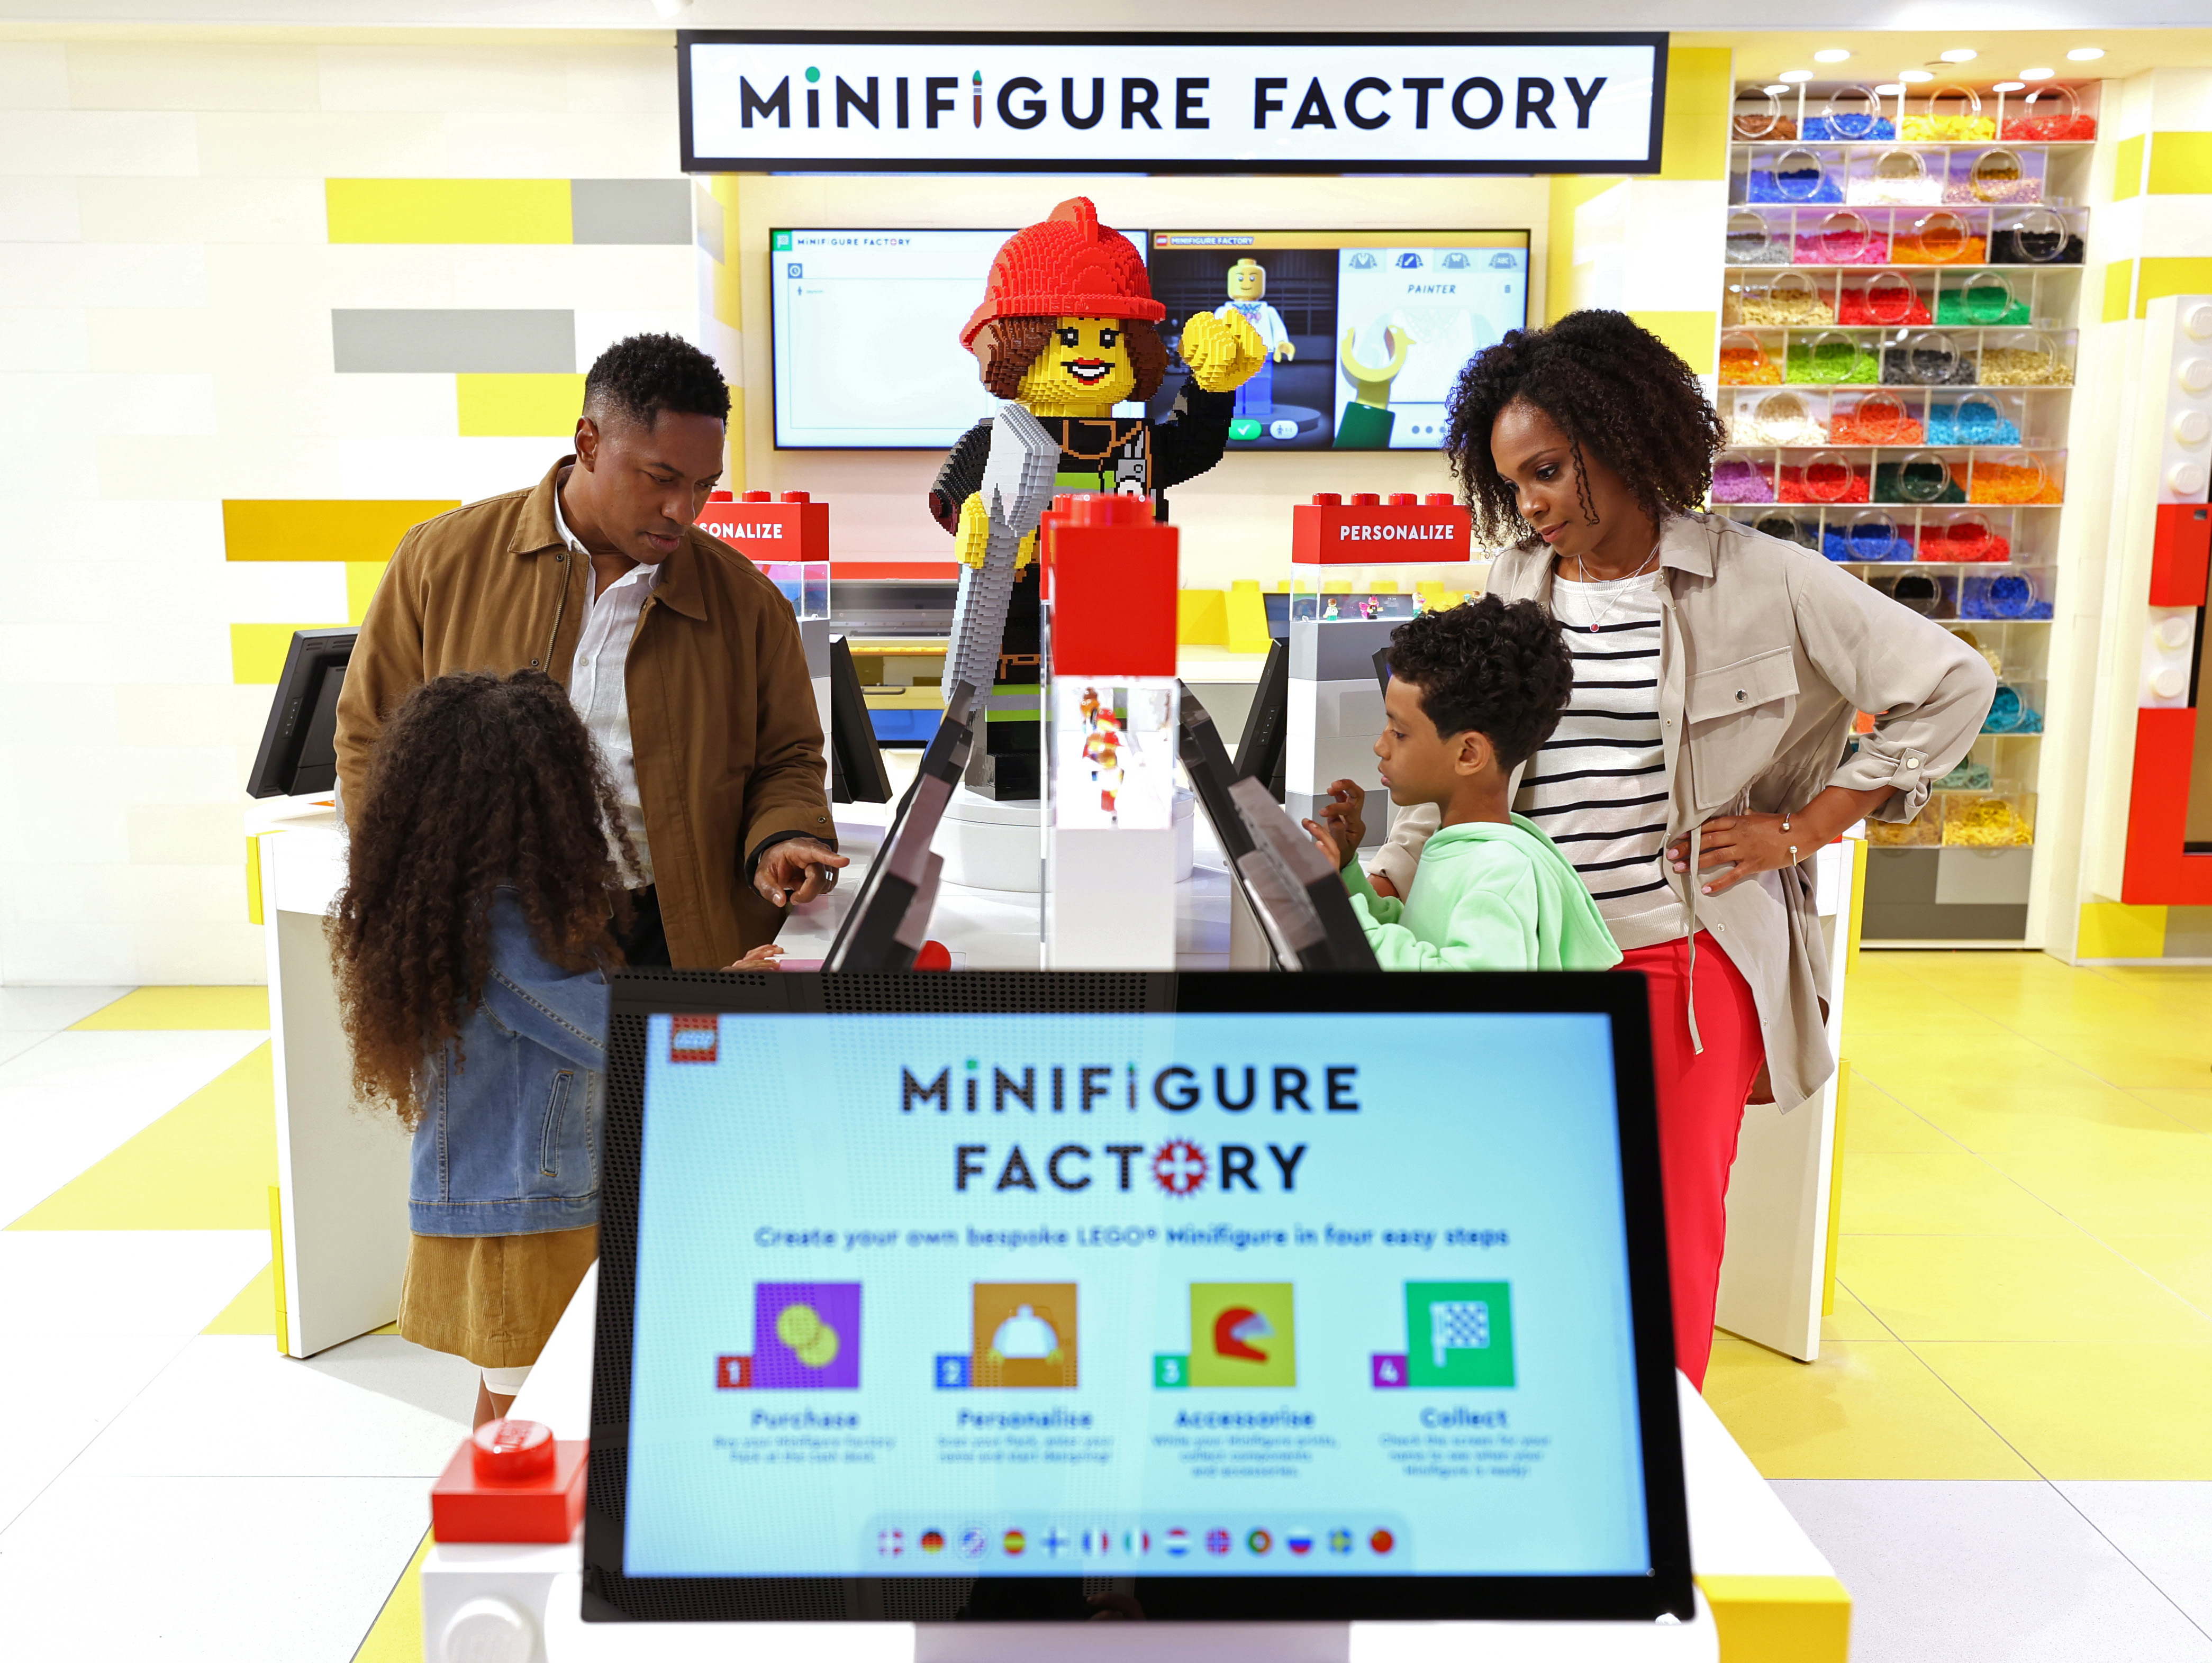 Family building Minifigures at the Minifigure Factory at The LEGO Store